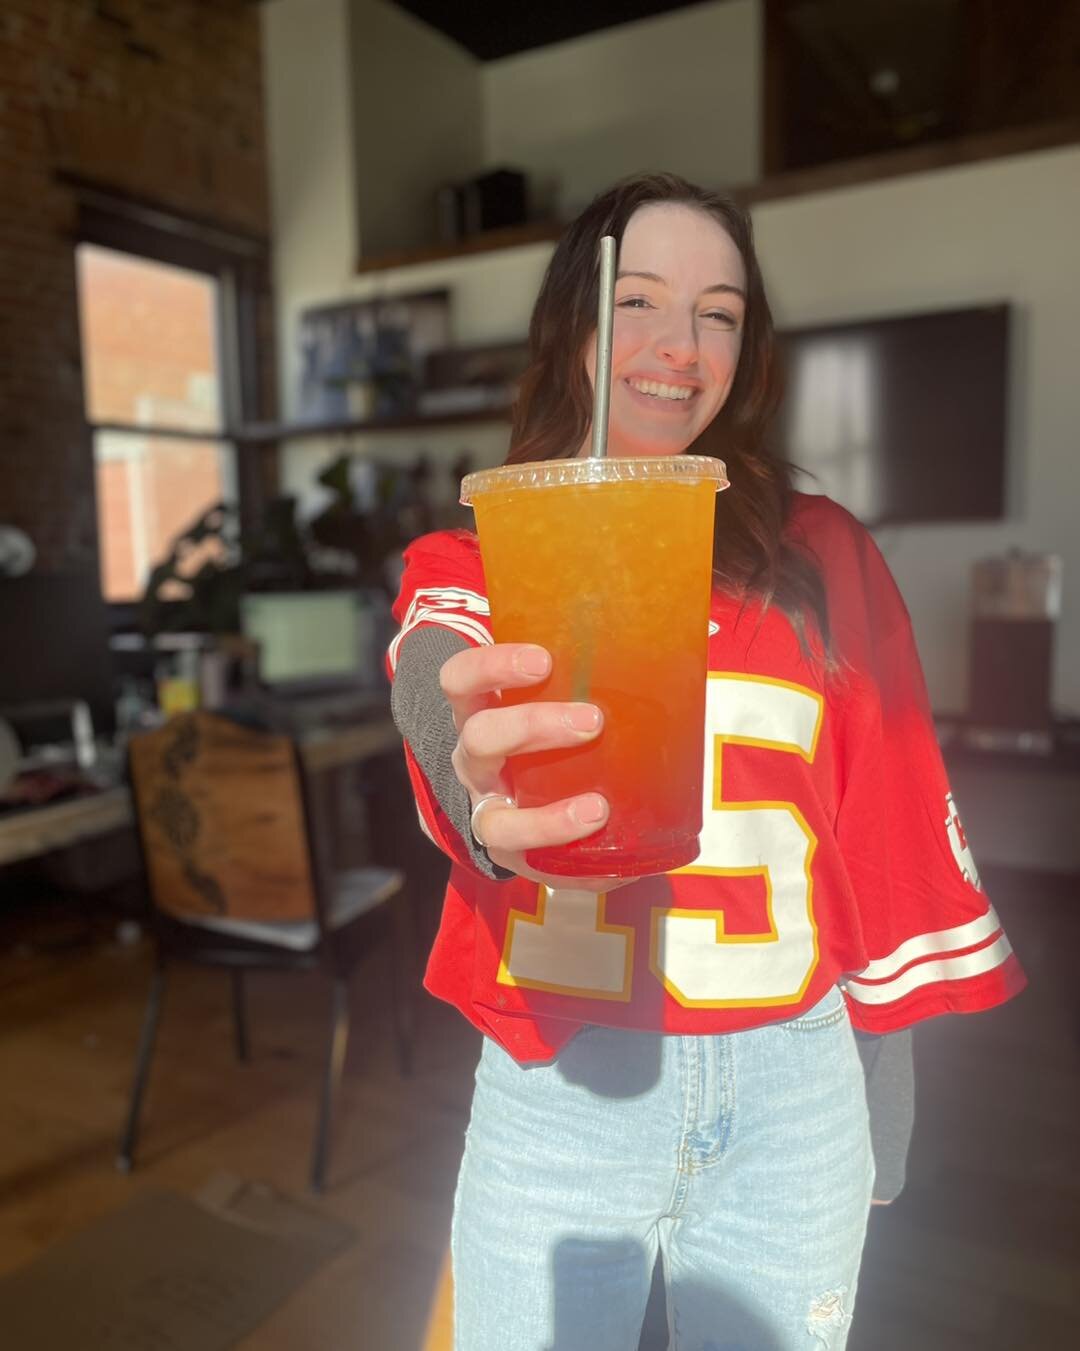 Rose are red 
Violets are red 
Everything is red 
GO CHIEFS! 
SUPER BOWL 57 CHAMPIONS! 
🏈💥❤️💛🏟️💛❤️💥🏈💥❤️💛🏟️

Drink of the WEEK:
Cherry Lemonade Sparkler! 

Or grab yourself a latte with our CHIEFS colored SPRINKLES!! ❤️💛❤️💛❤️💛❤️

#worldch